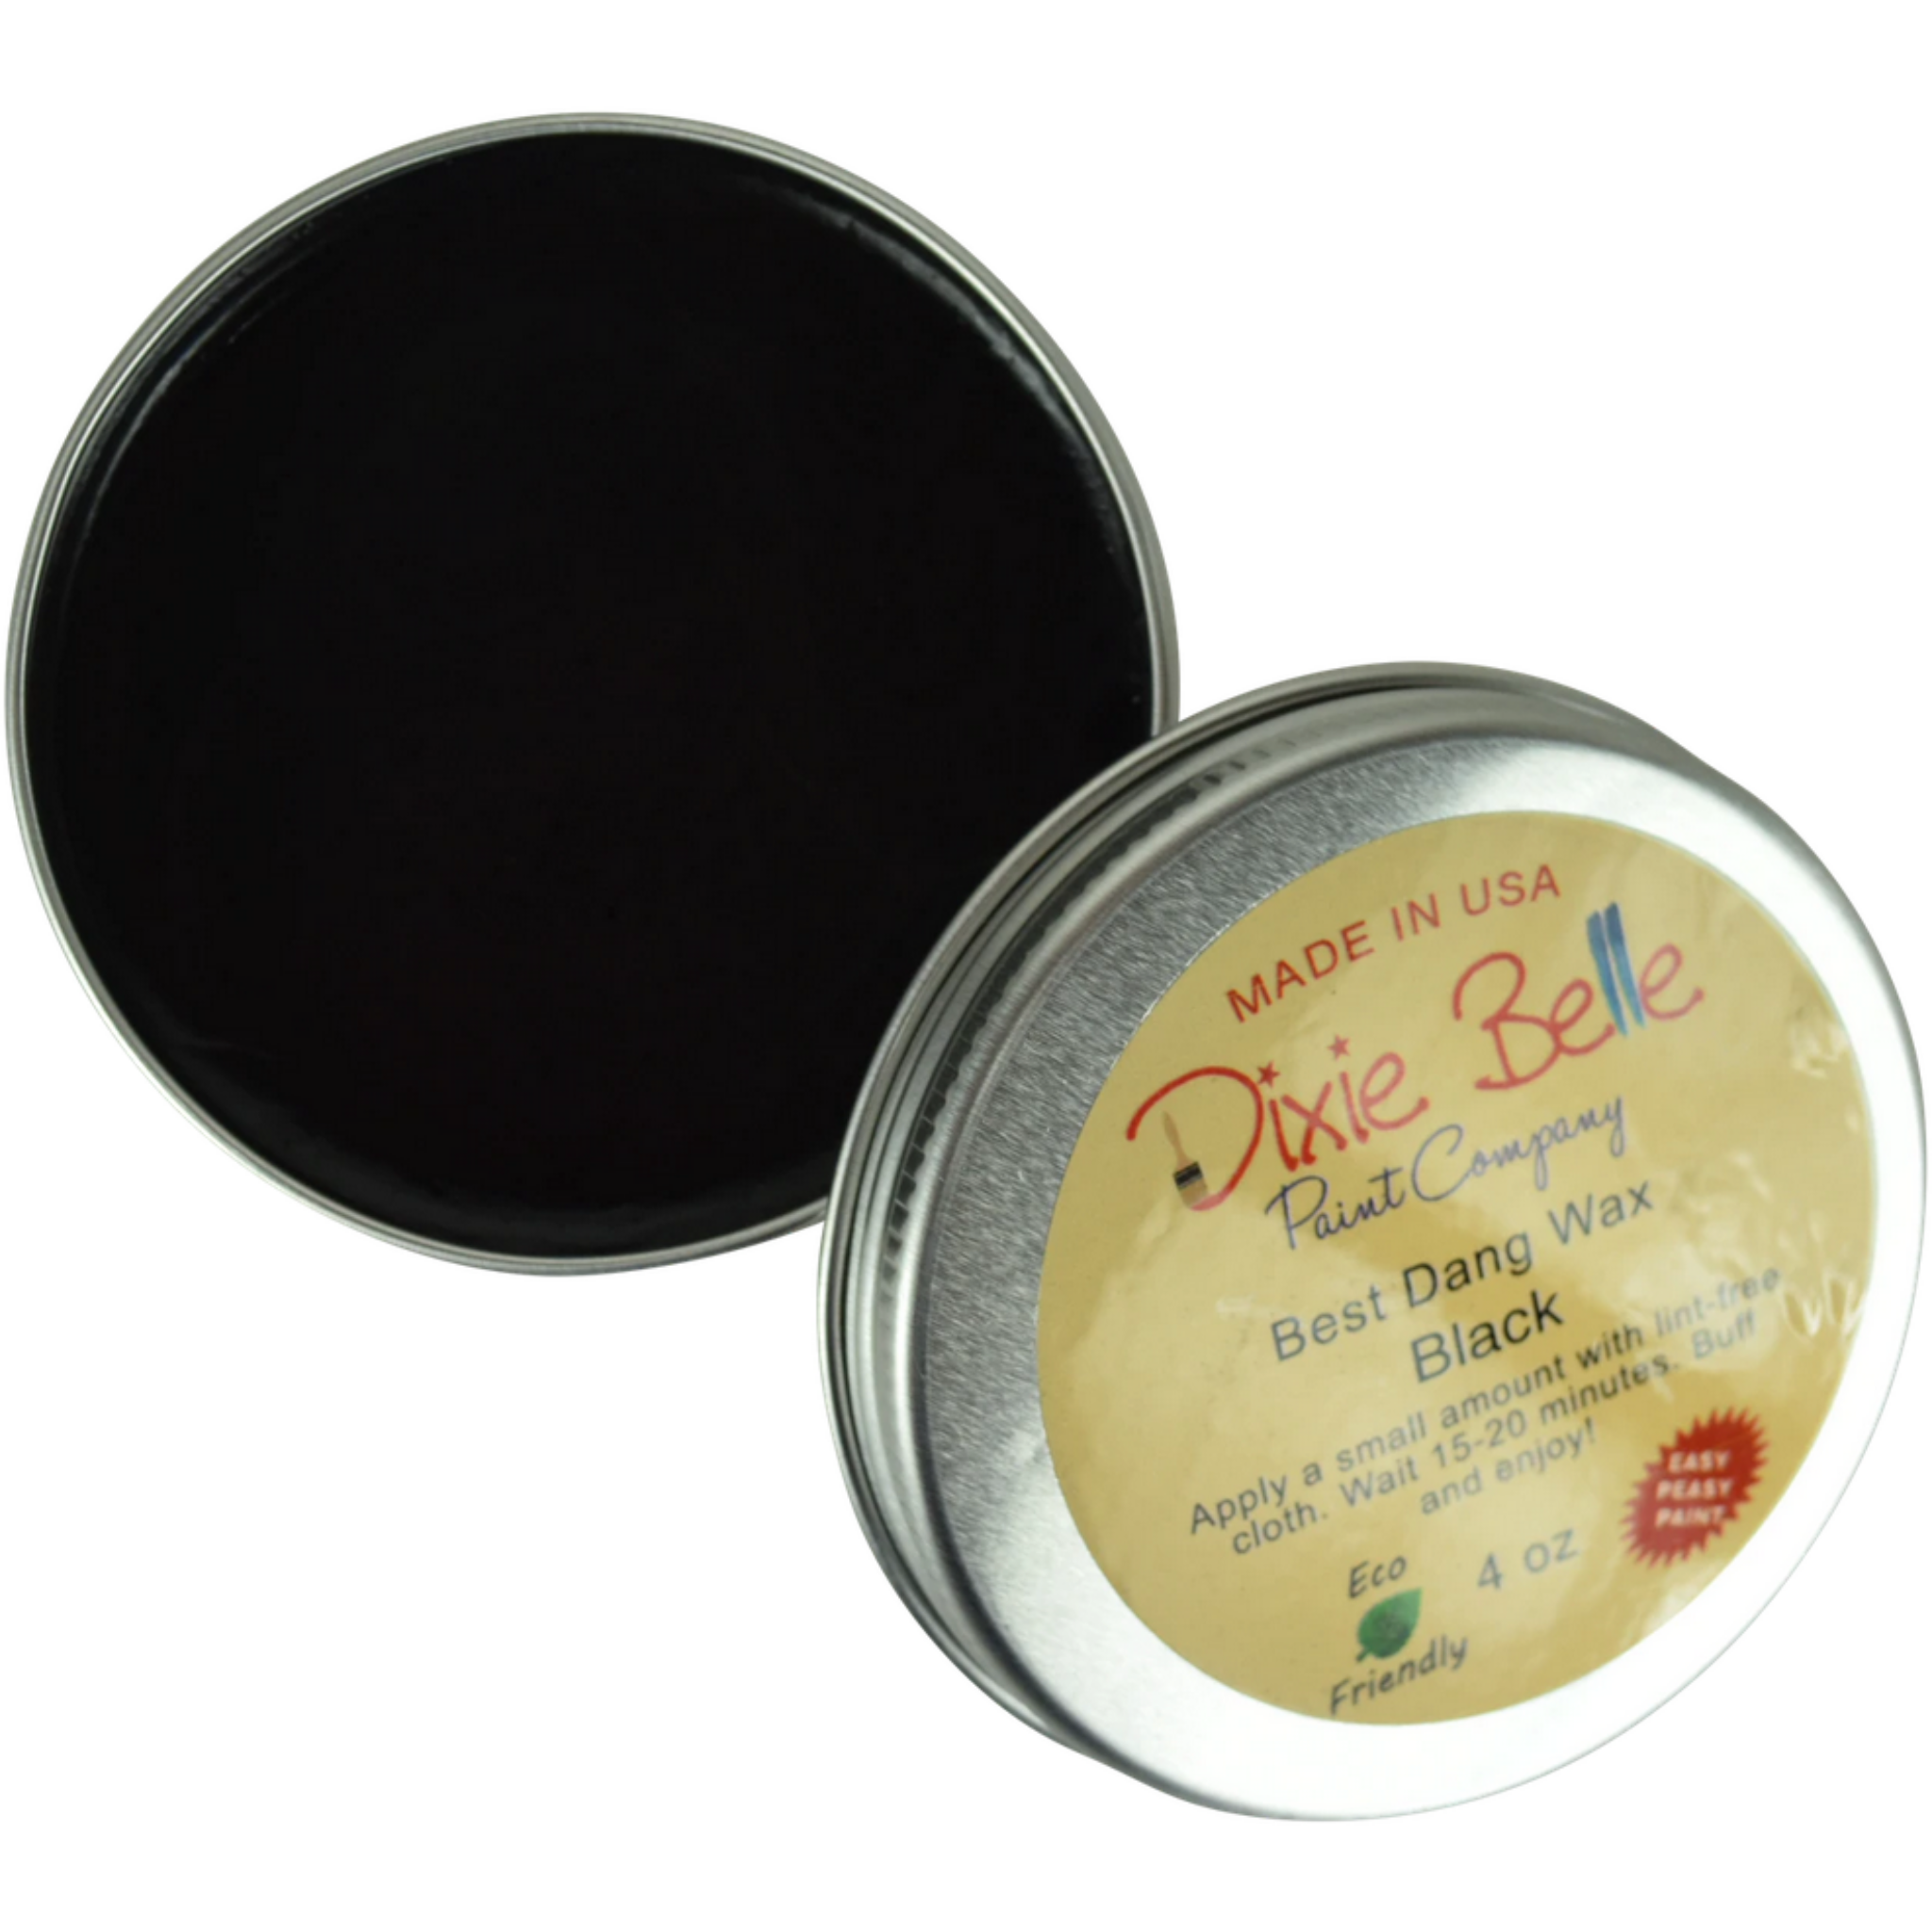 An open tin of Dixie Belle Paint's 4 ounce Black Best Dang Wax is against a white background.